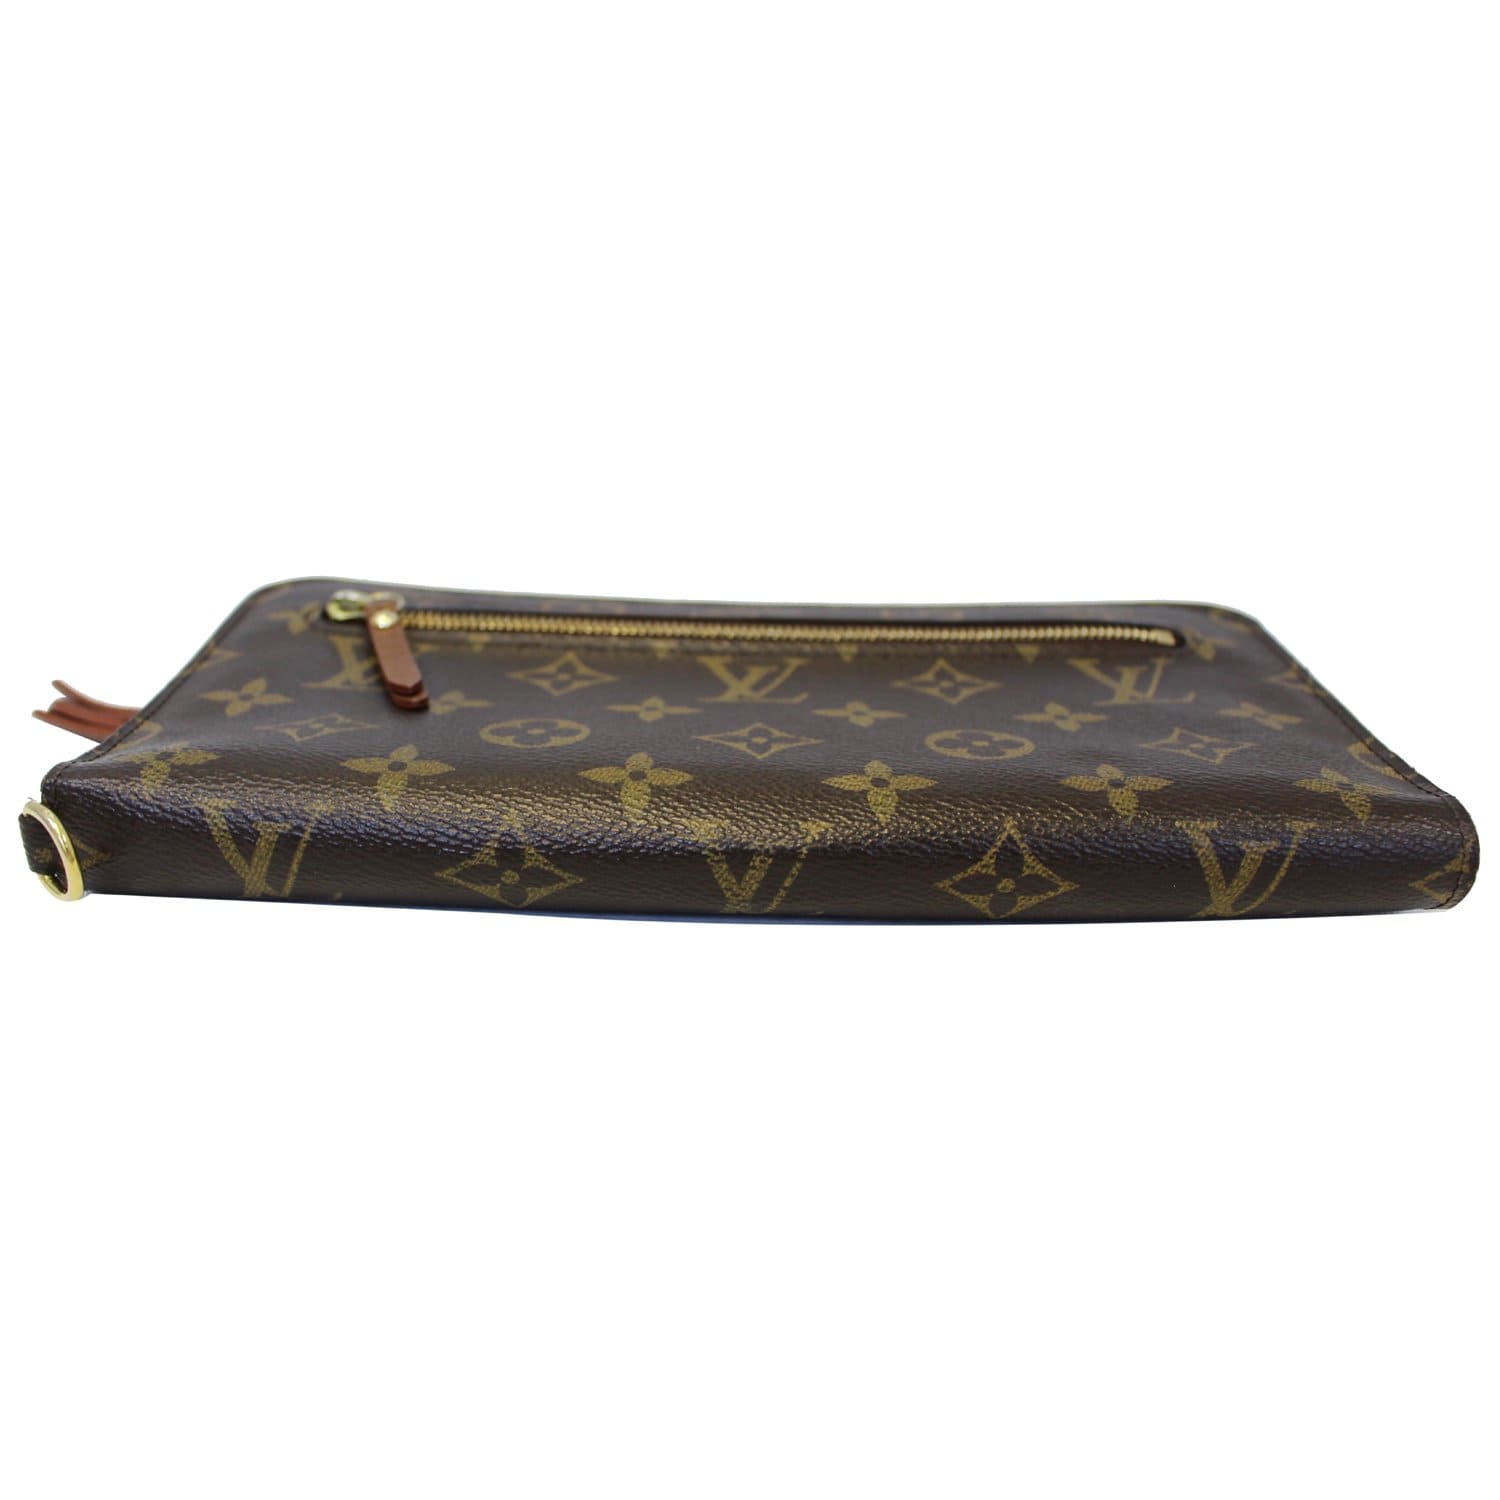 Insolite leather wallet Louis Vuitton Brown in Leather - 26491346